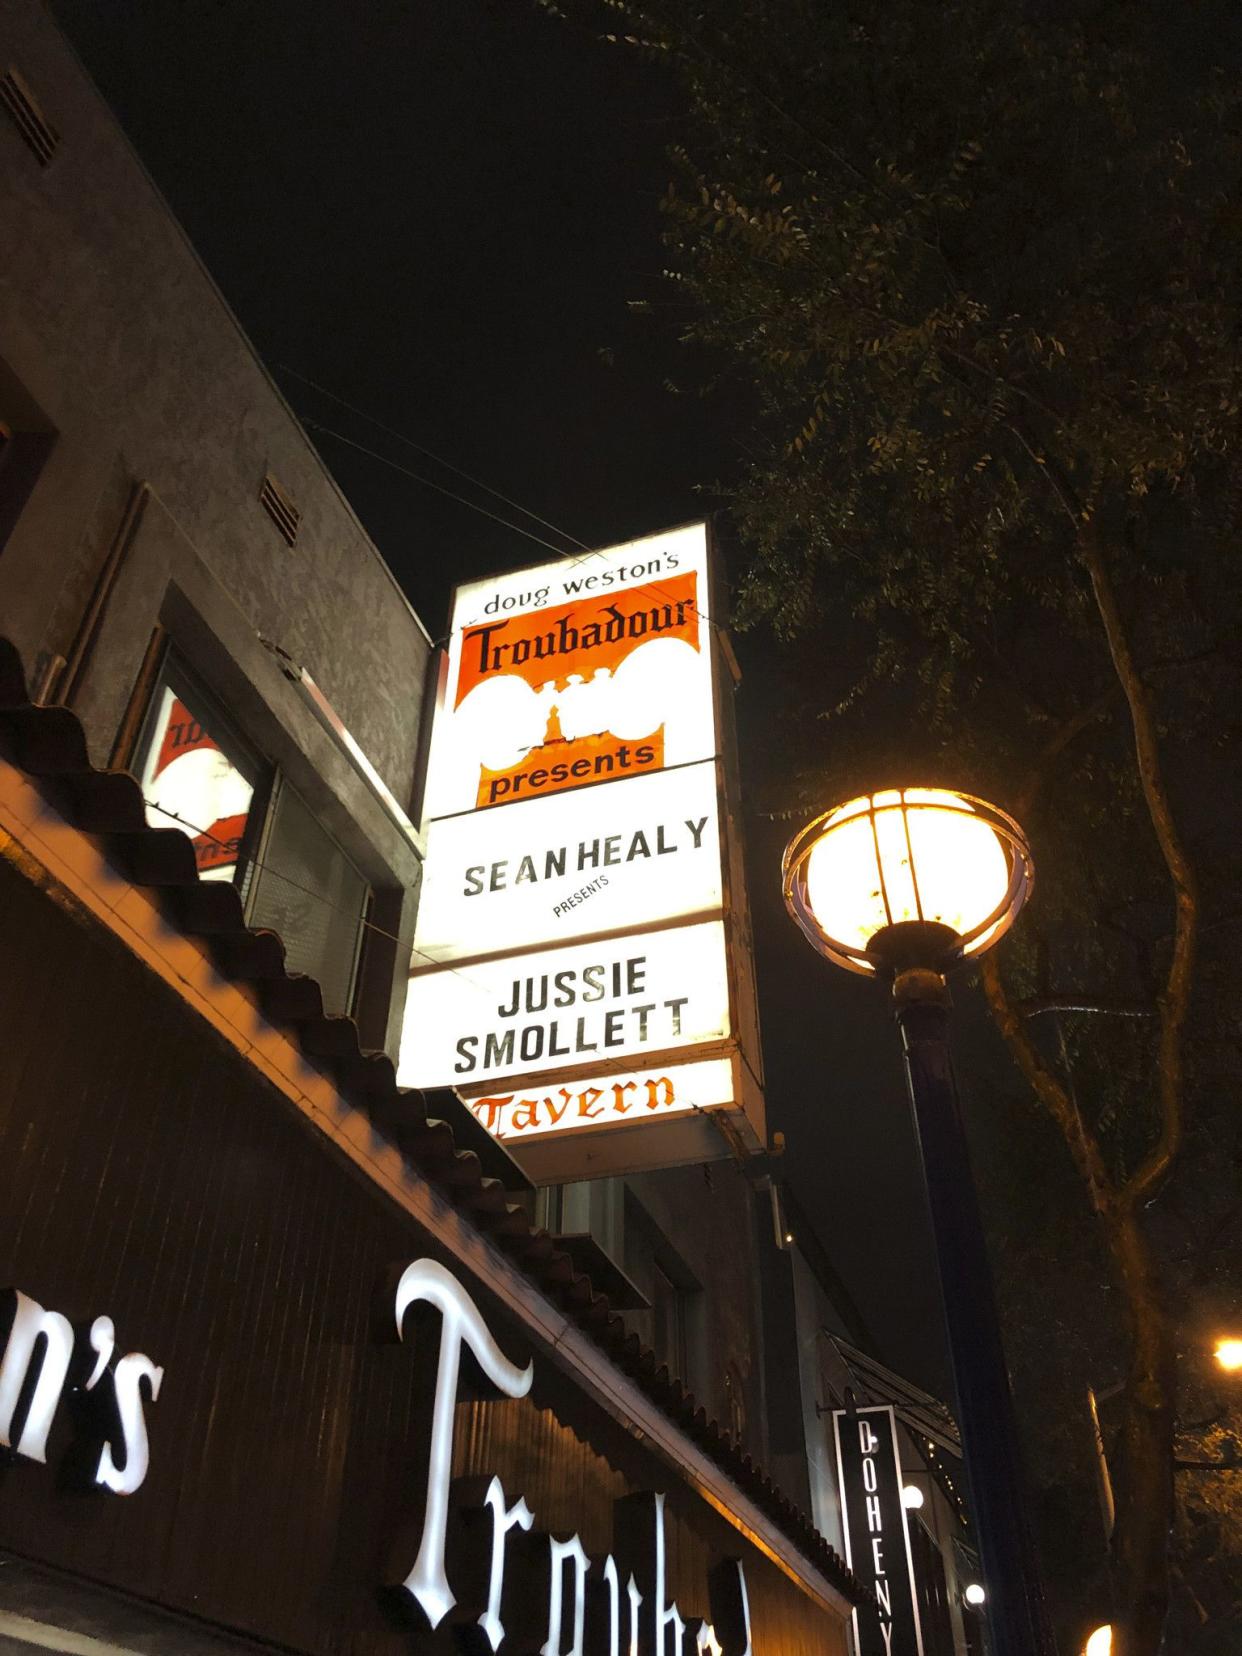 The Troubadour headlines singer and actor Jussie Smollett on its marquee who performs in concert on Feb. 2, 2019, in West Hollywood, Calif. "Empire" actor and R&B; singer Smollett opened a Southern California concert with an emotional speech, saying he had to play the show because he couldn't let his attackers win.